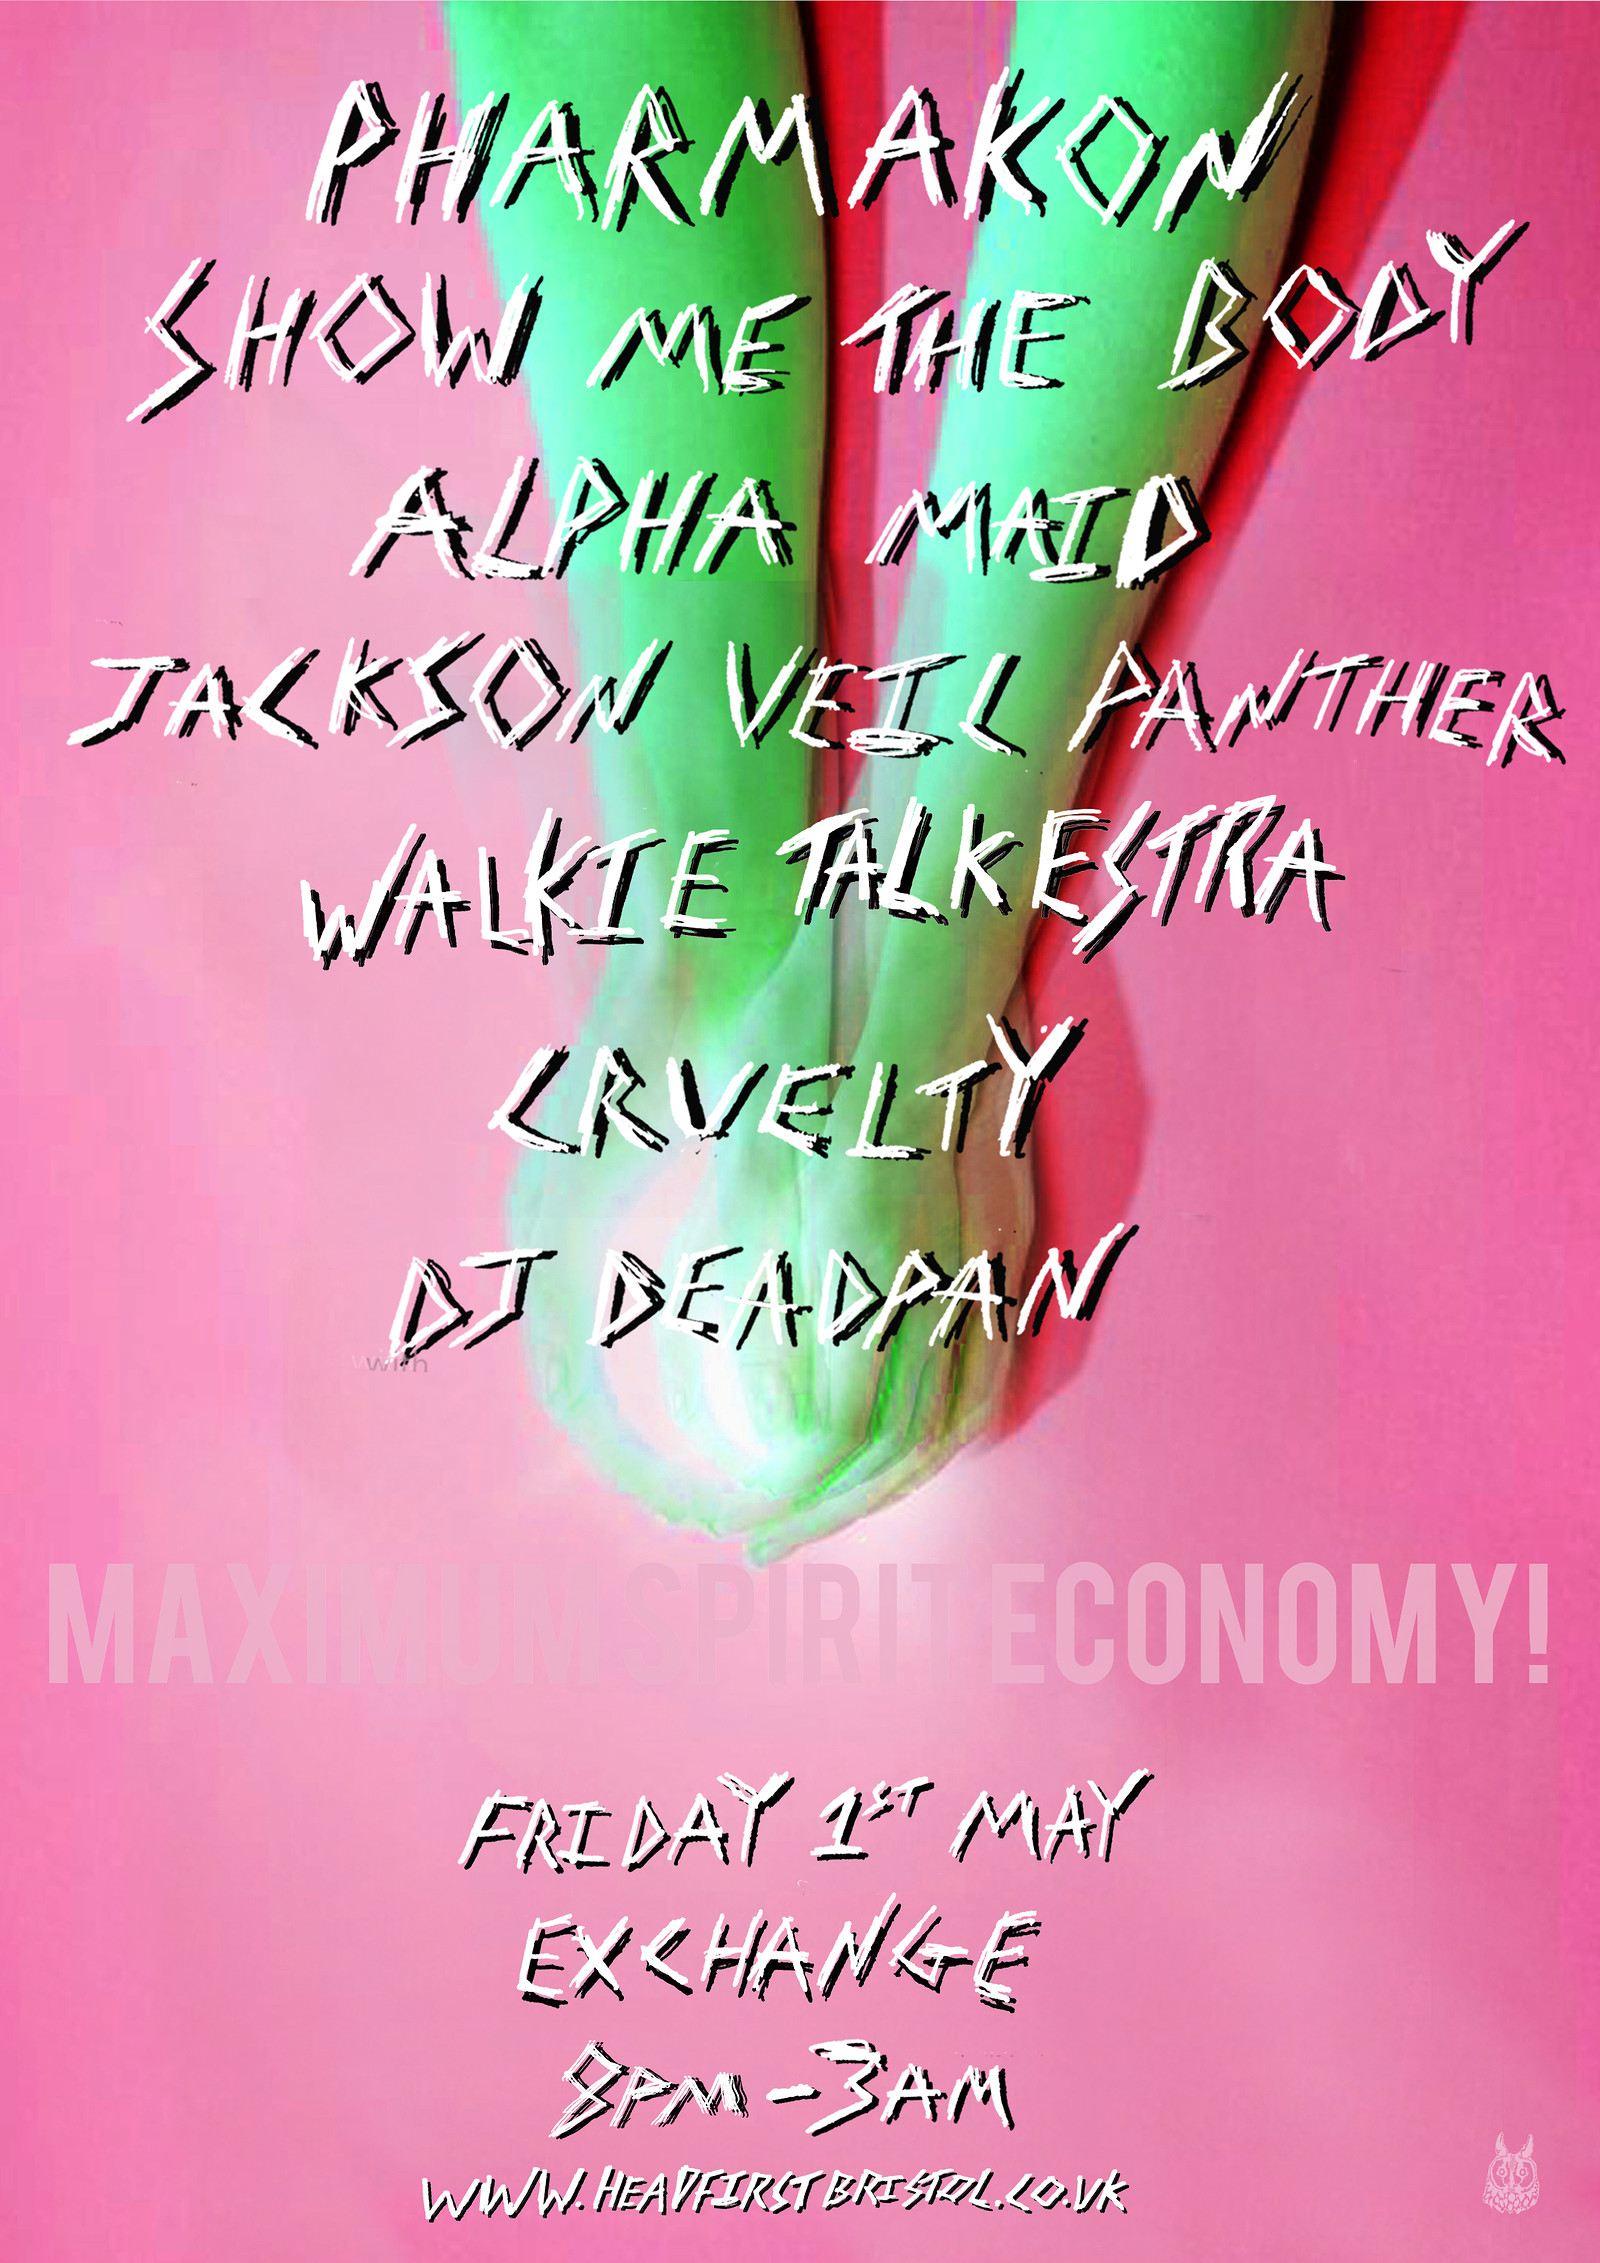 MSE2 PHARMAKON + SHOW  ME THE BODY + MANY MORE at Exchange